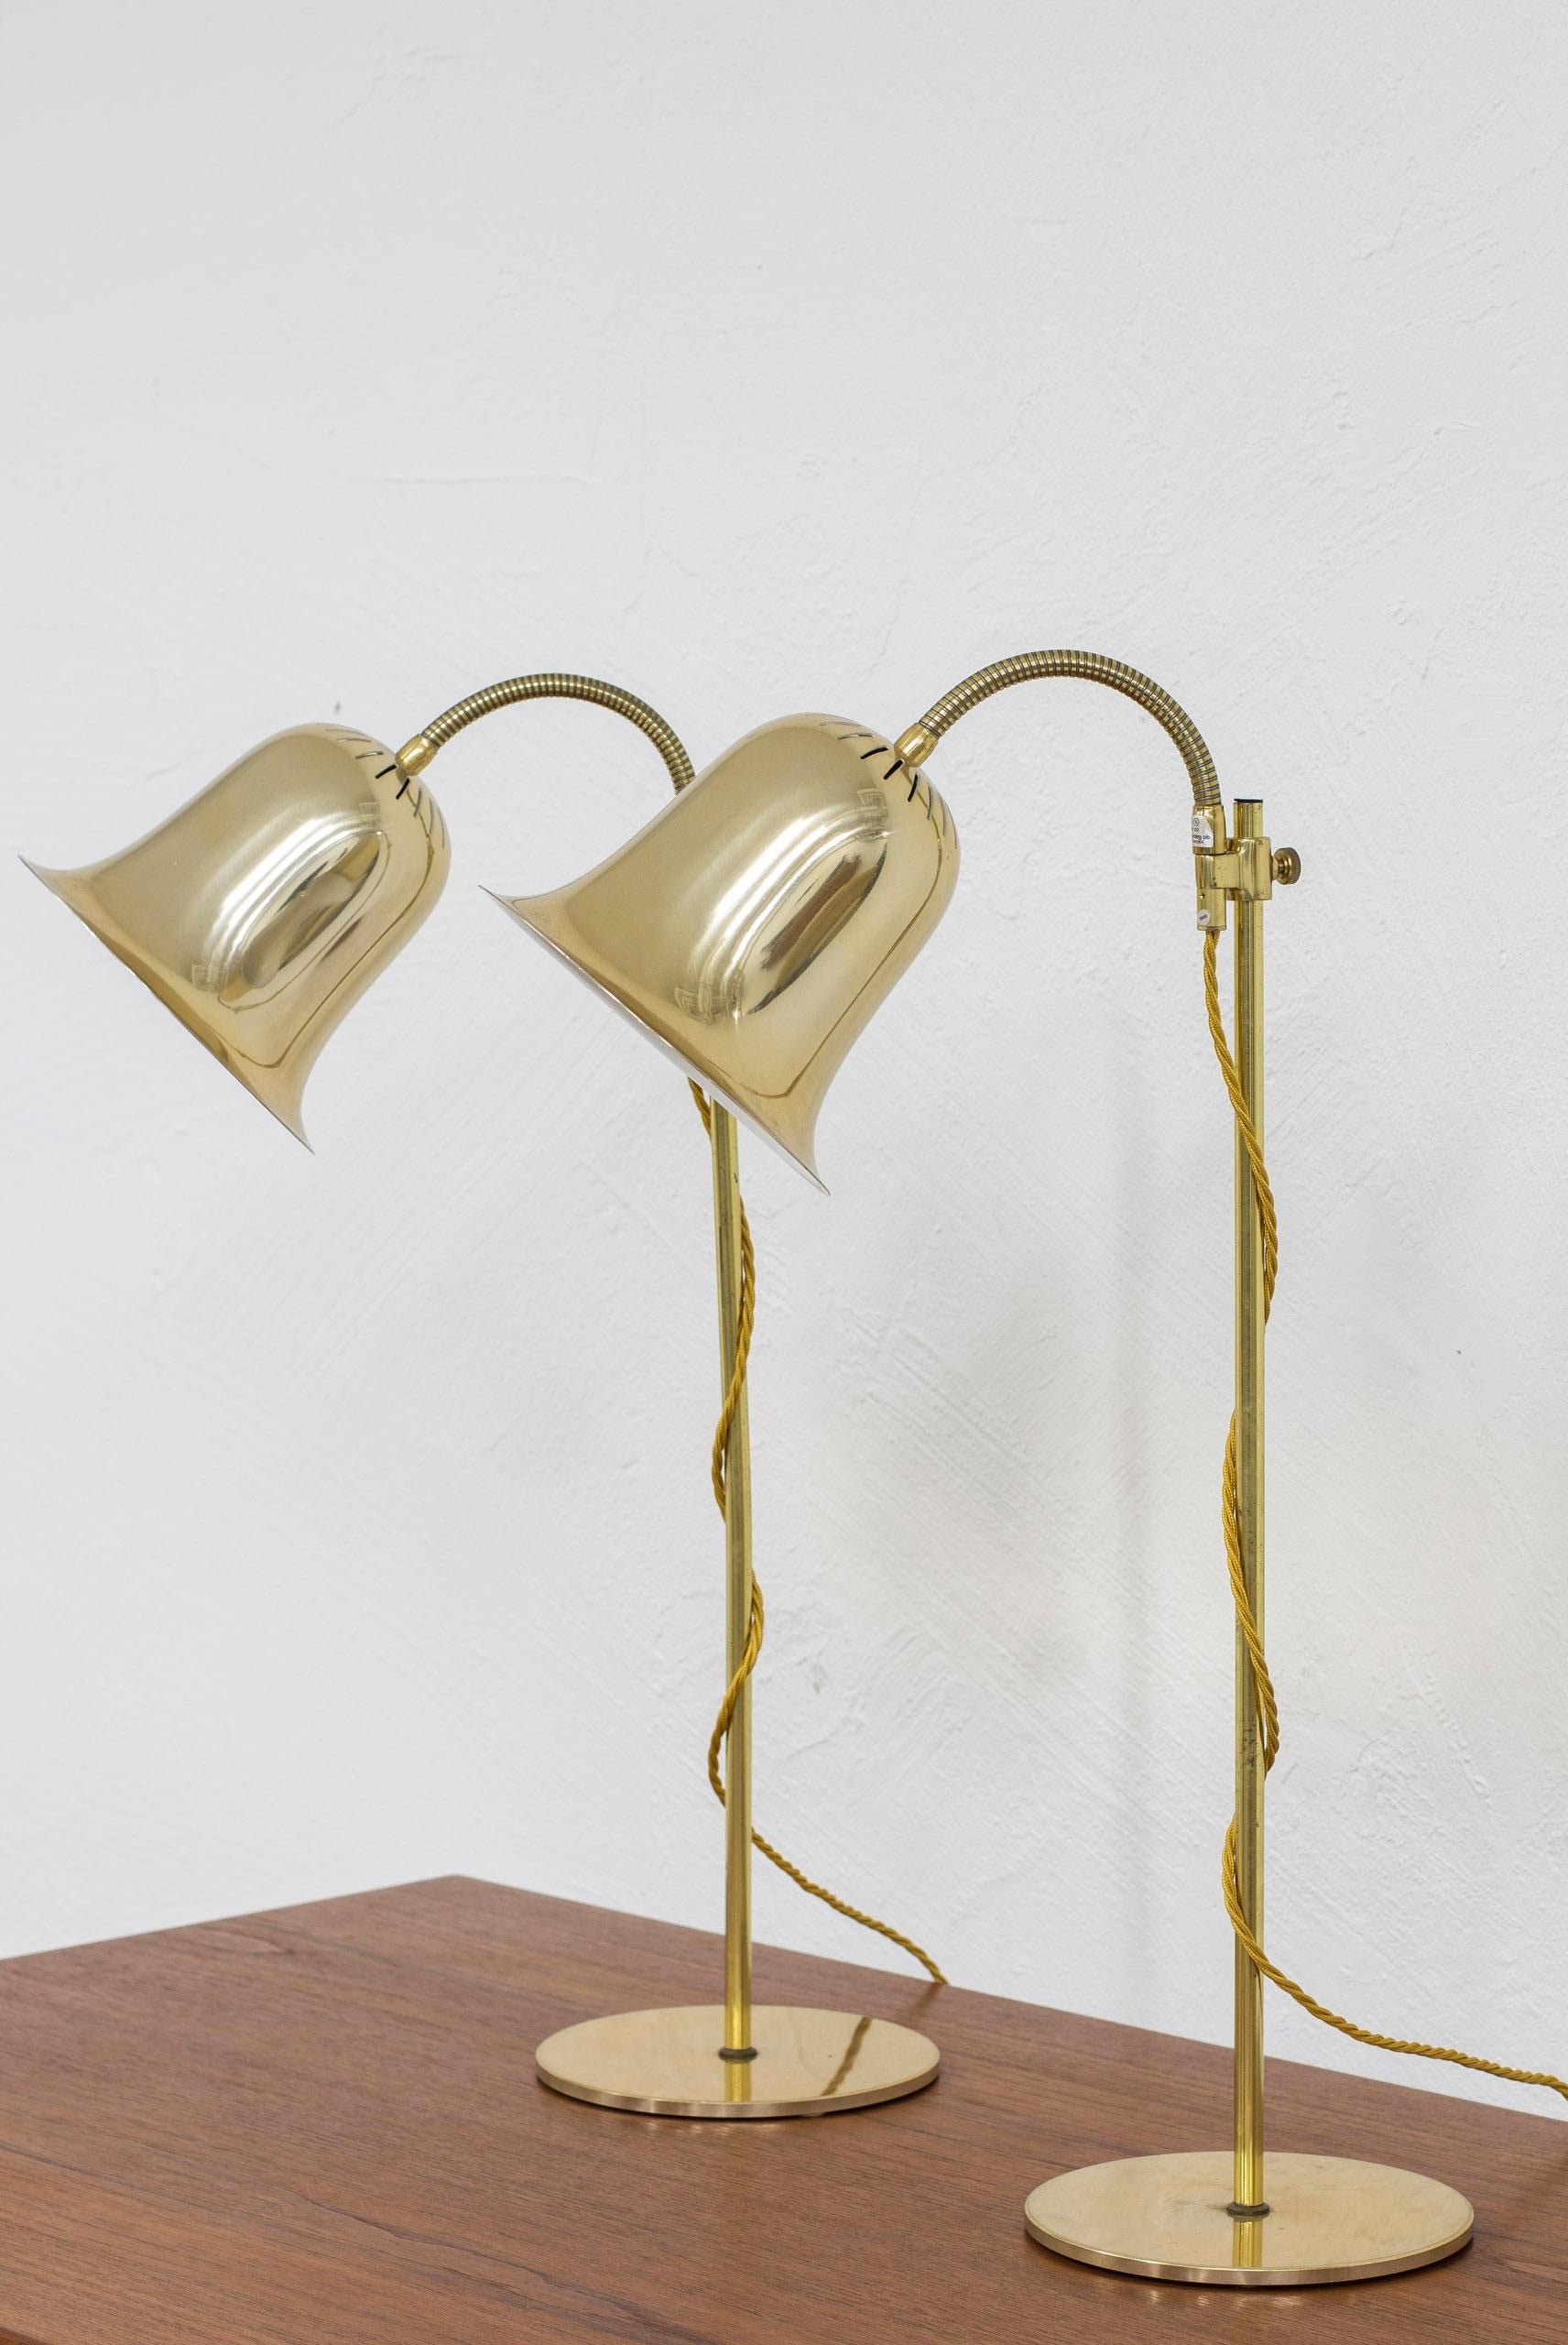 Pair of table lamps produced in Sweden by Trivselbelysning AB. Made from Brass and aluminum. Adjustable in angle and in height. Light switch on the chords. Good vintage condition with some slight age related wear and patina.

Price for the